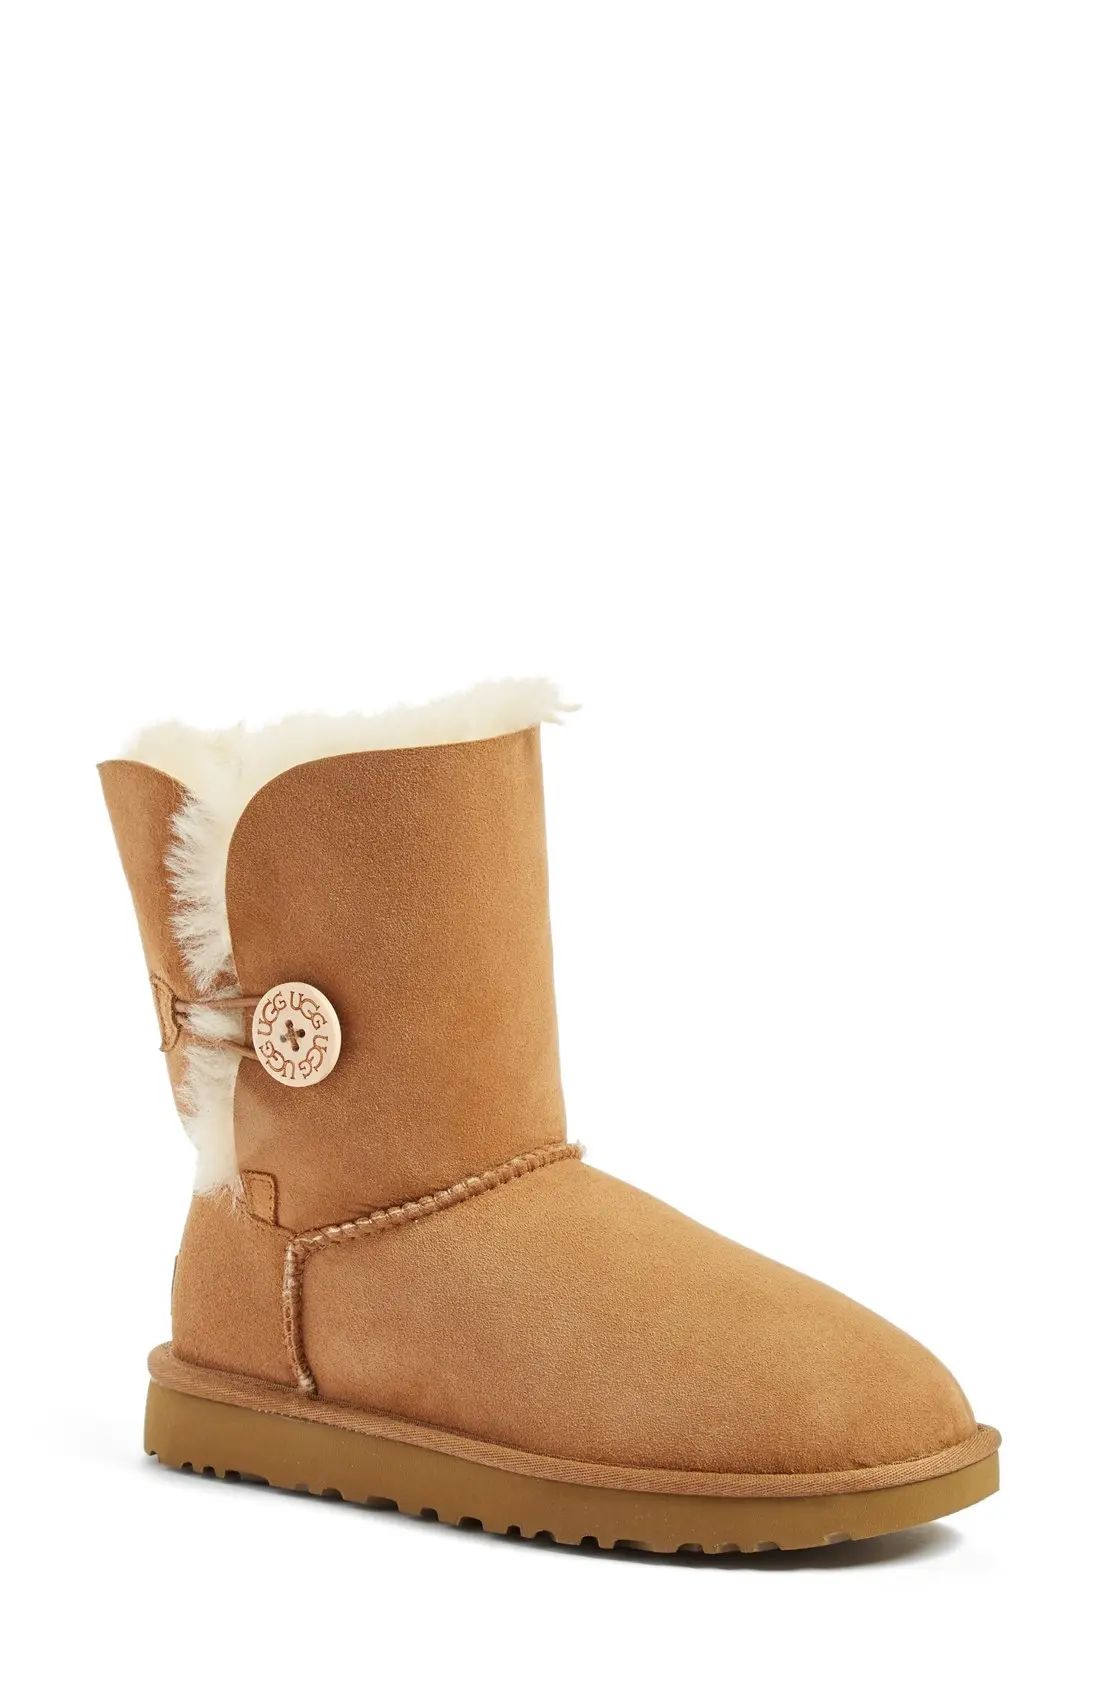 Women's UGG Bailey Button Ii Boot, Size 6 M - Brown | Nordstrom